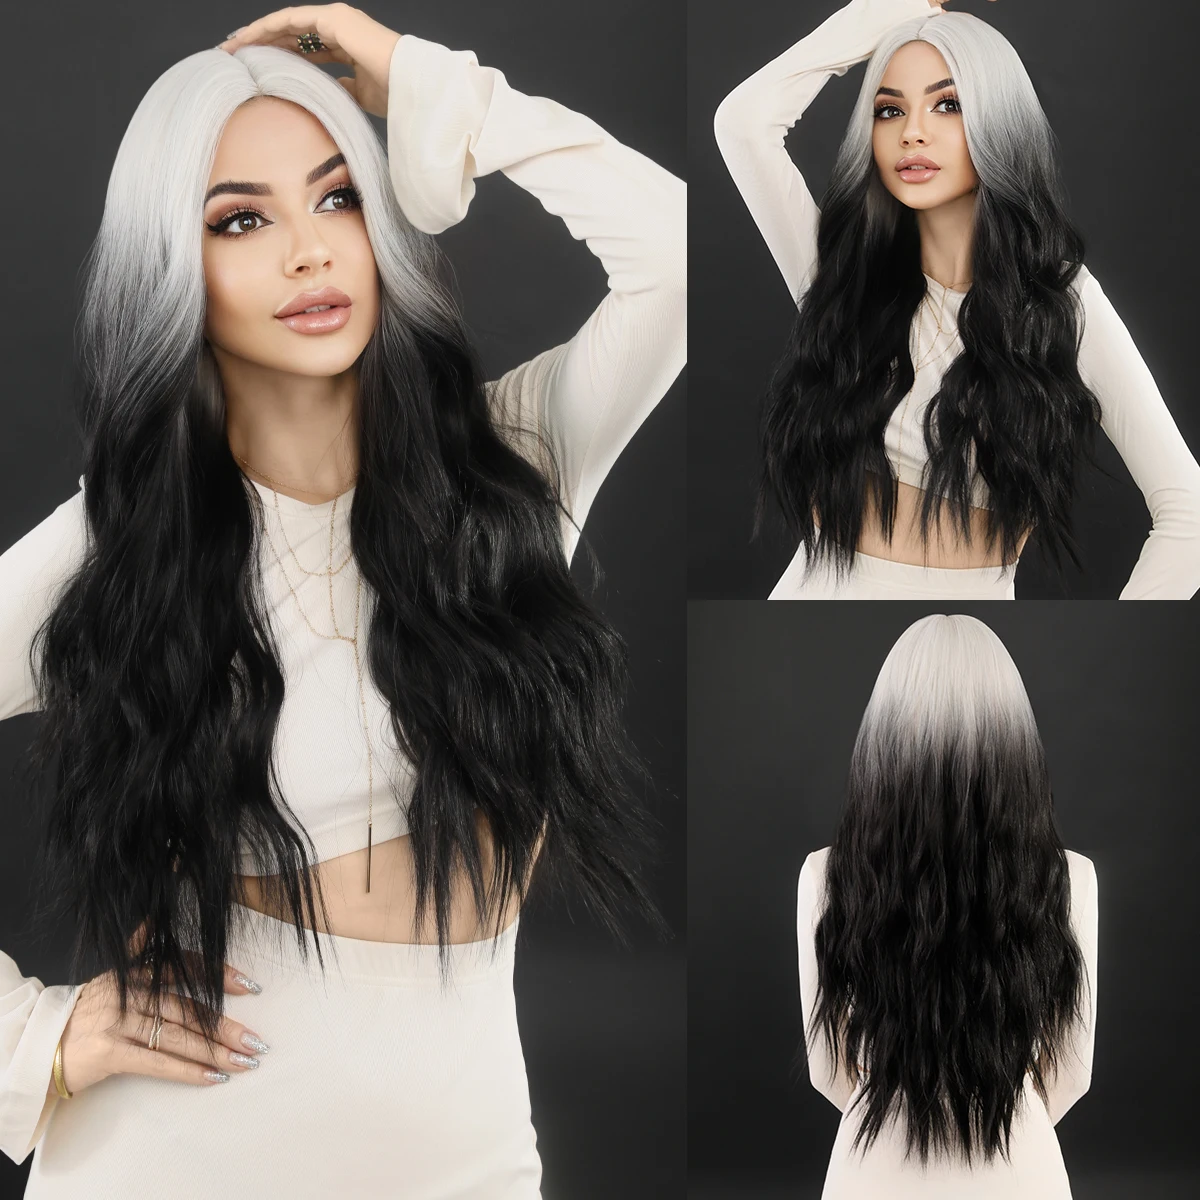 namm-ombre-black-white-wavy-hair-wig-for-women-cosplay-daily-party-synthetic-natural-middle-part-curly-wig-lolita-heat-resistant